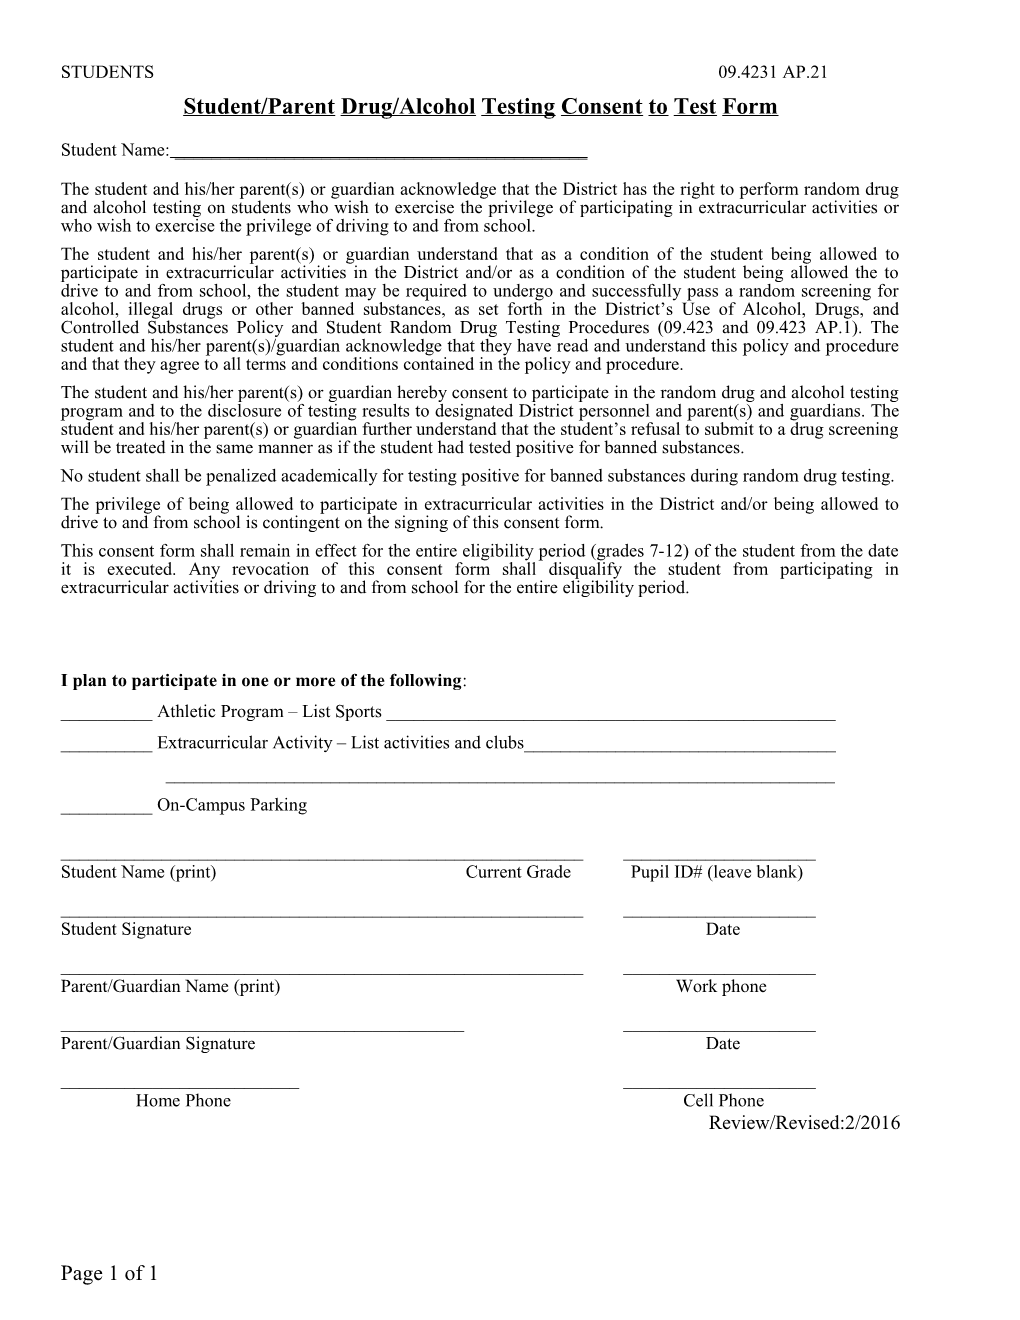 Student/Parent Drug/Alcohol Testing Consent to Test Form